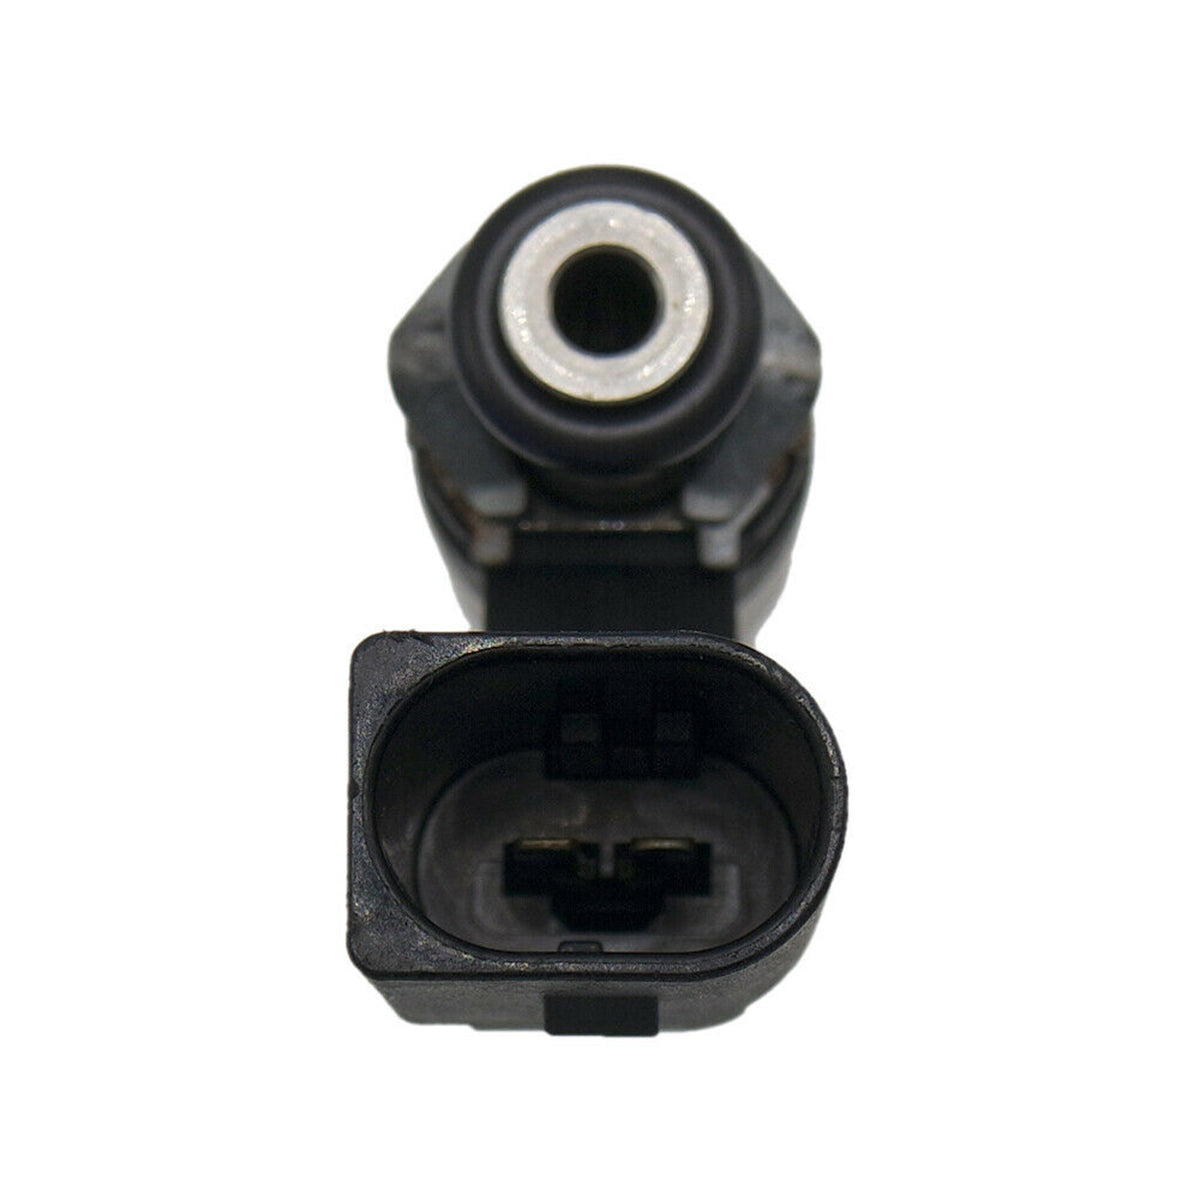 Fuel Injector 03C906036M, Fuel Injector For VW Golf Jetta Passat Audi, Car Fuel Injector, Auto Fuel Injector, Daysyore Fuel Injector